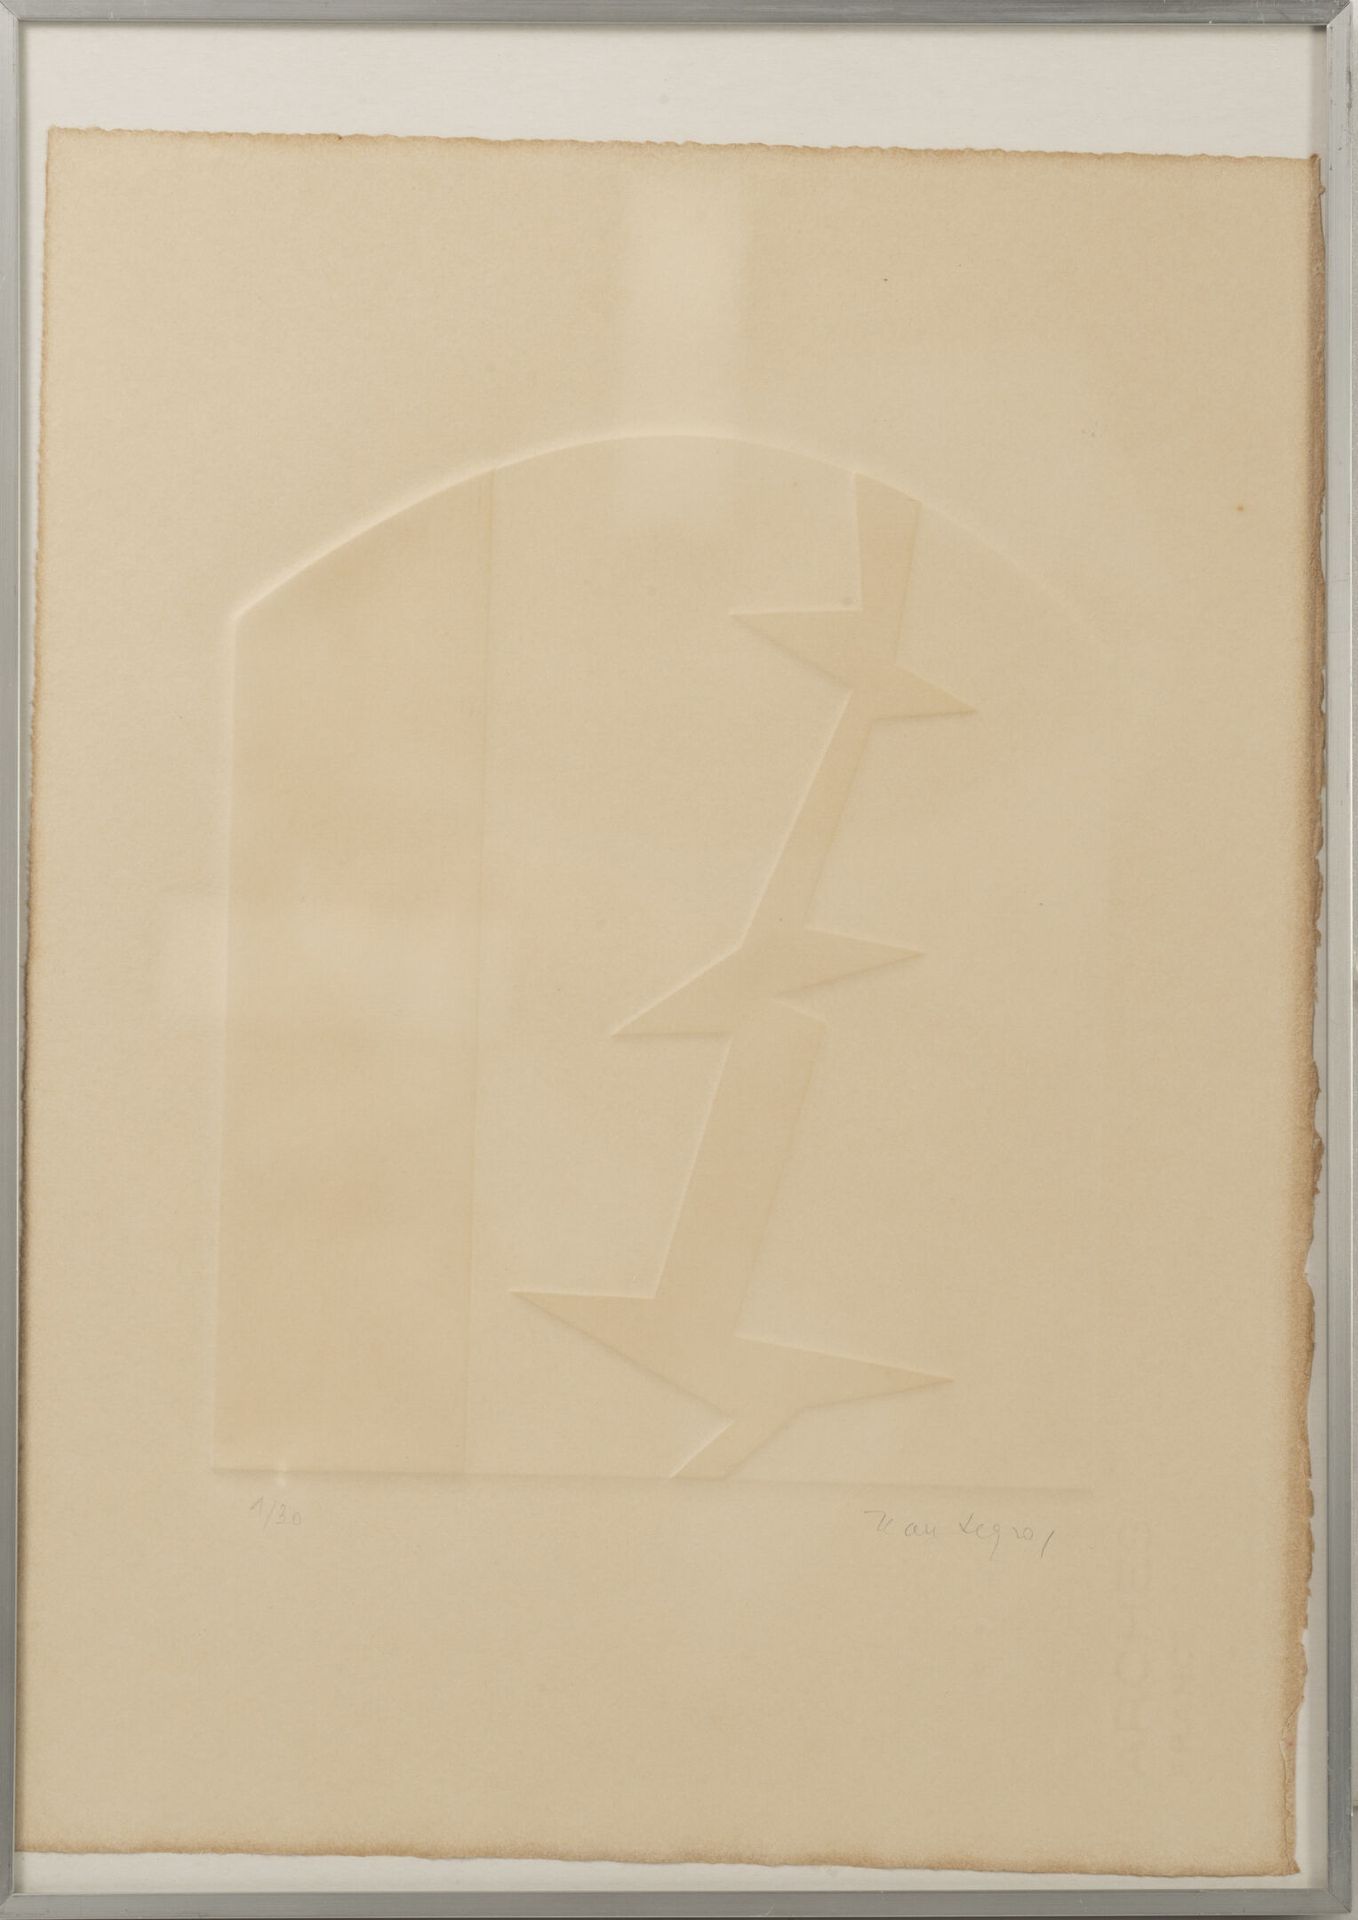 Jean LEGROS (1917-1981) Untitled, relief.
Print on paper.
Signed lower right and&hellip;